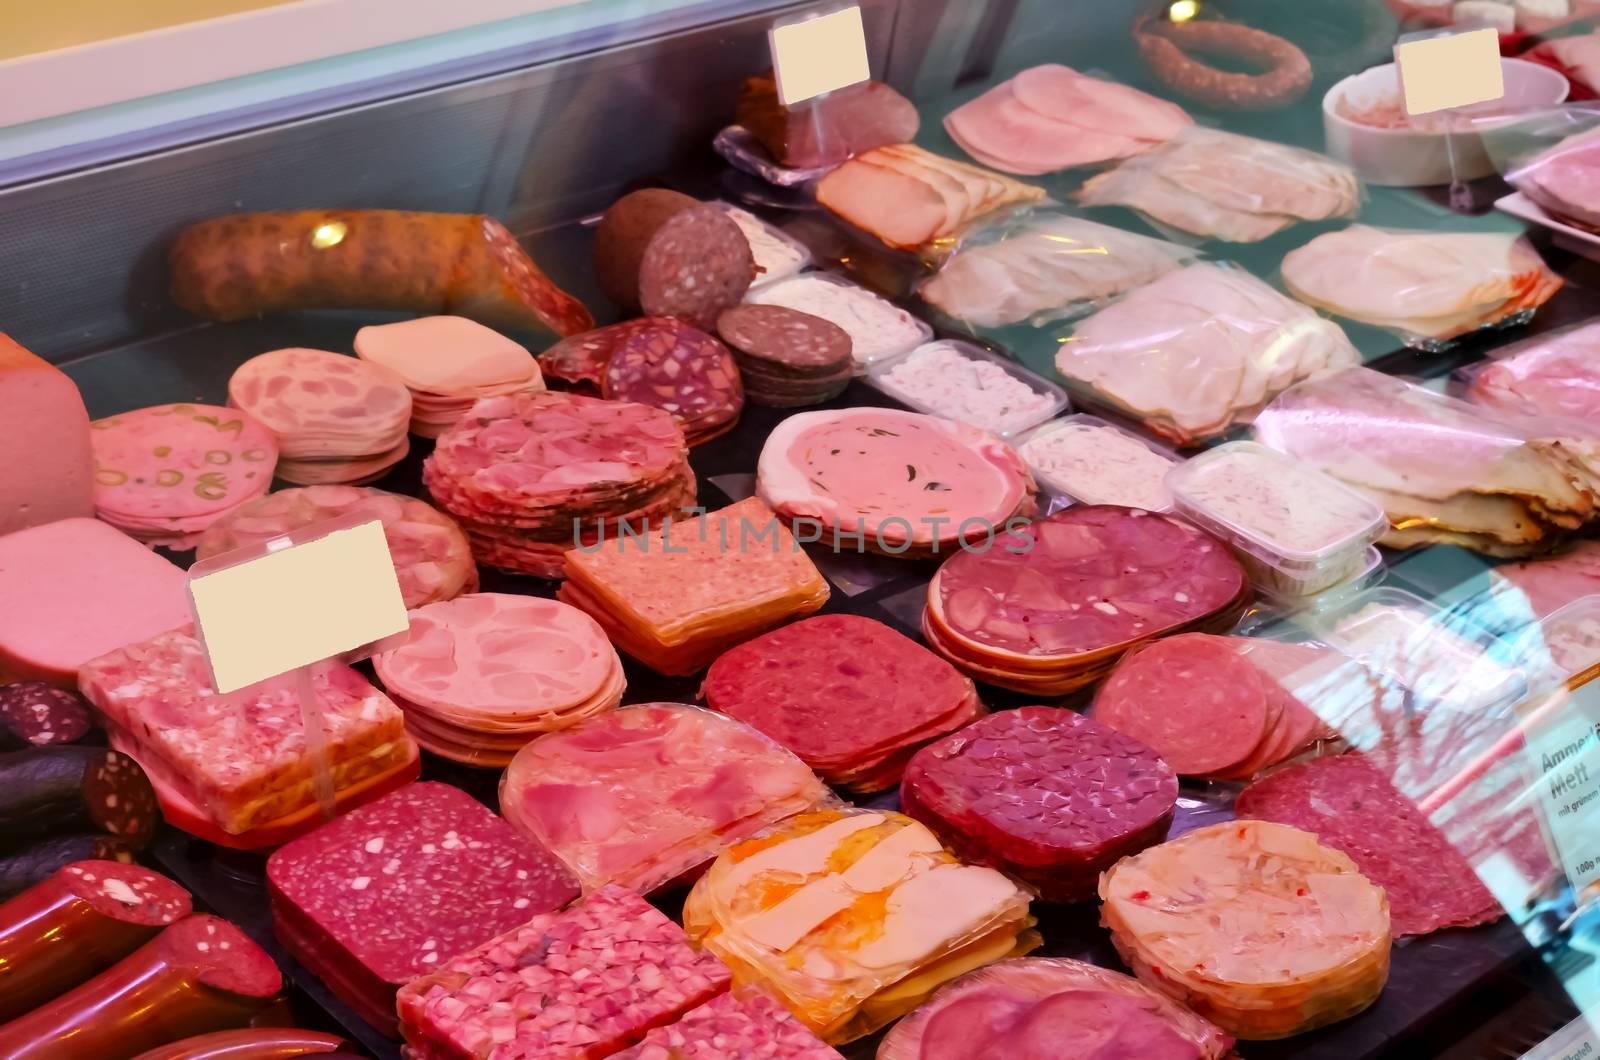 The well-stocked sausage window of a butcher shop